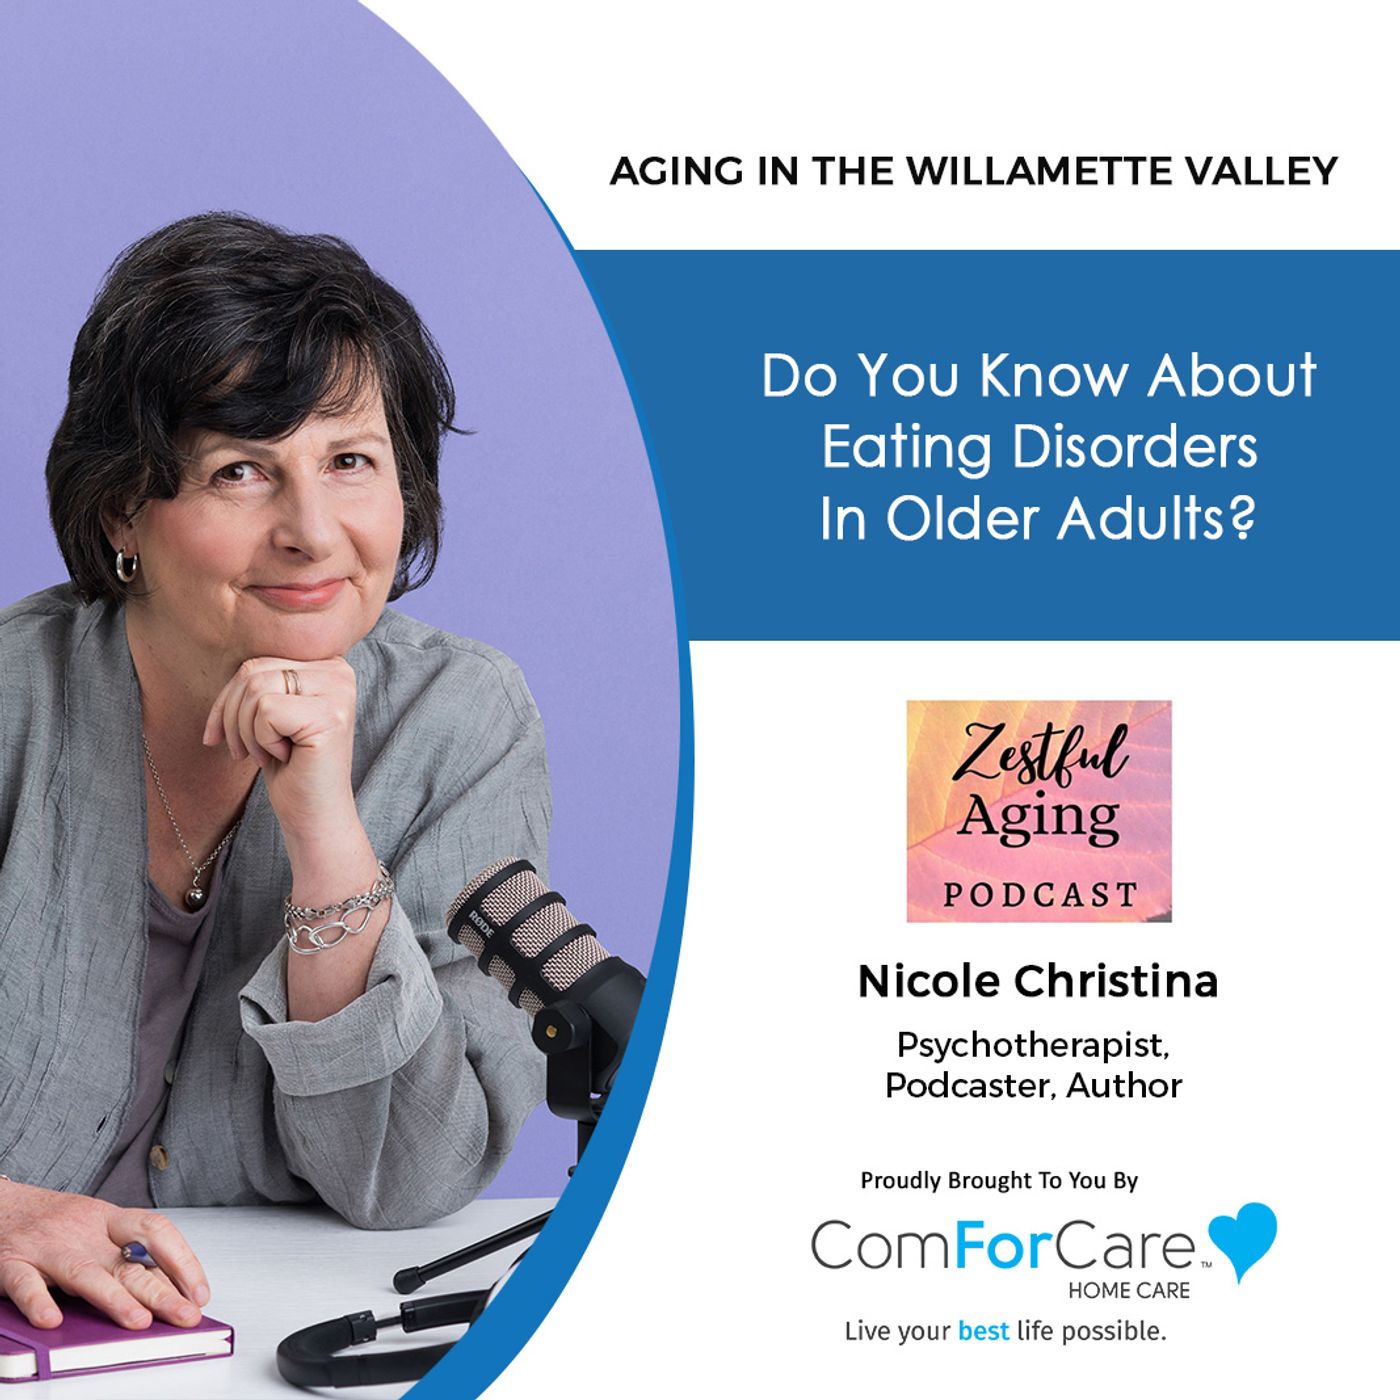 01/07/23: Nicole Christina with Zestful Aging Podcast | Do You Know About Eating Disorders in Older Adults? | Aging In The Willamette Valley